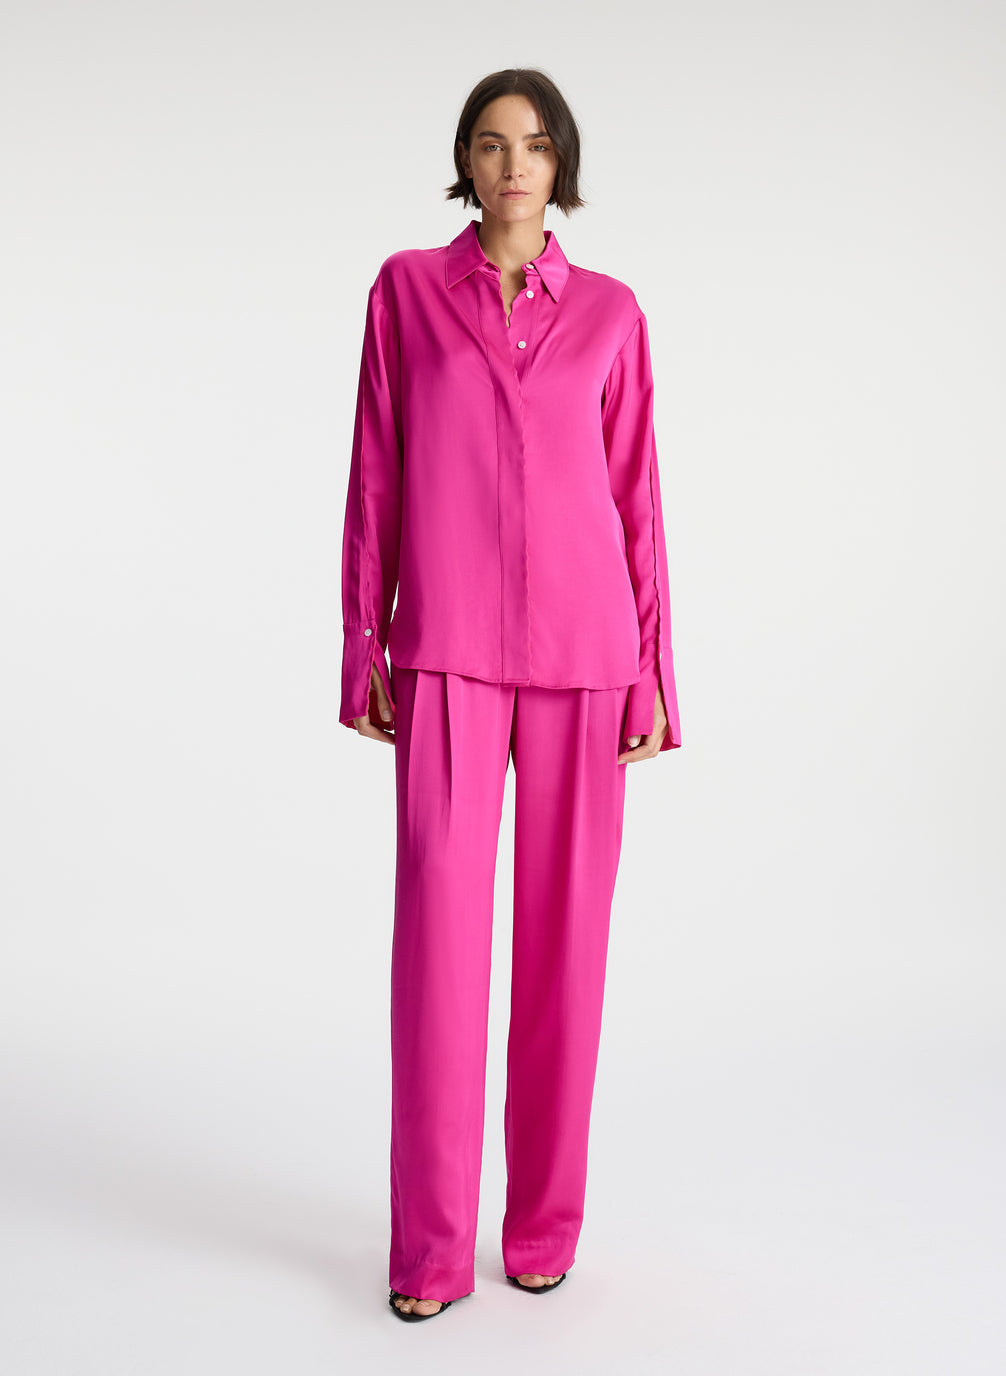 front view of woman wearing bright pink scalloped detailed long sleeve satin shirt and bright pink pants